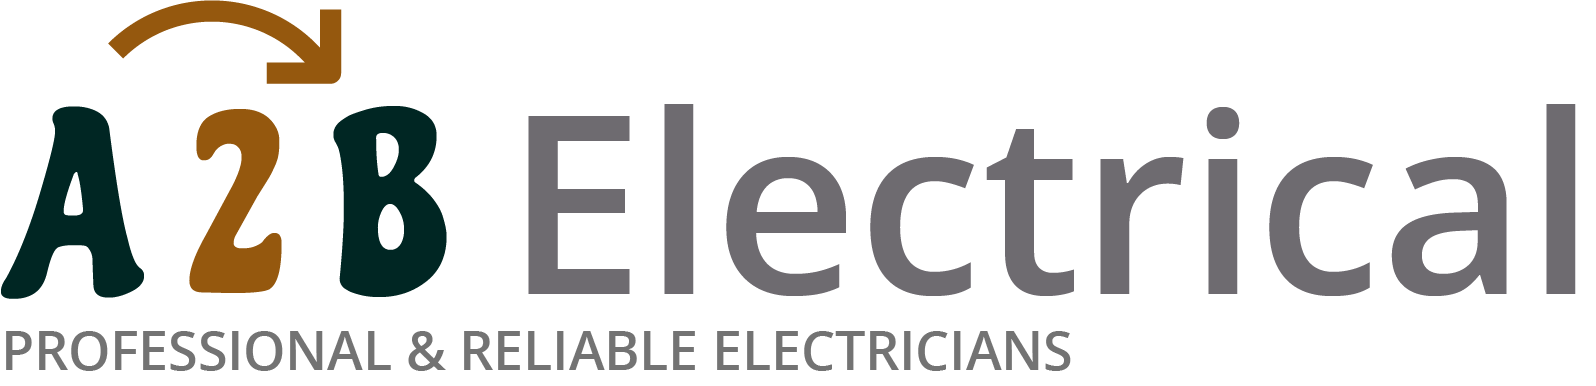 If you have electrical wiring problems in Malton, we can provide an electrician to have a look for you. 